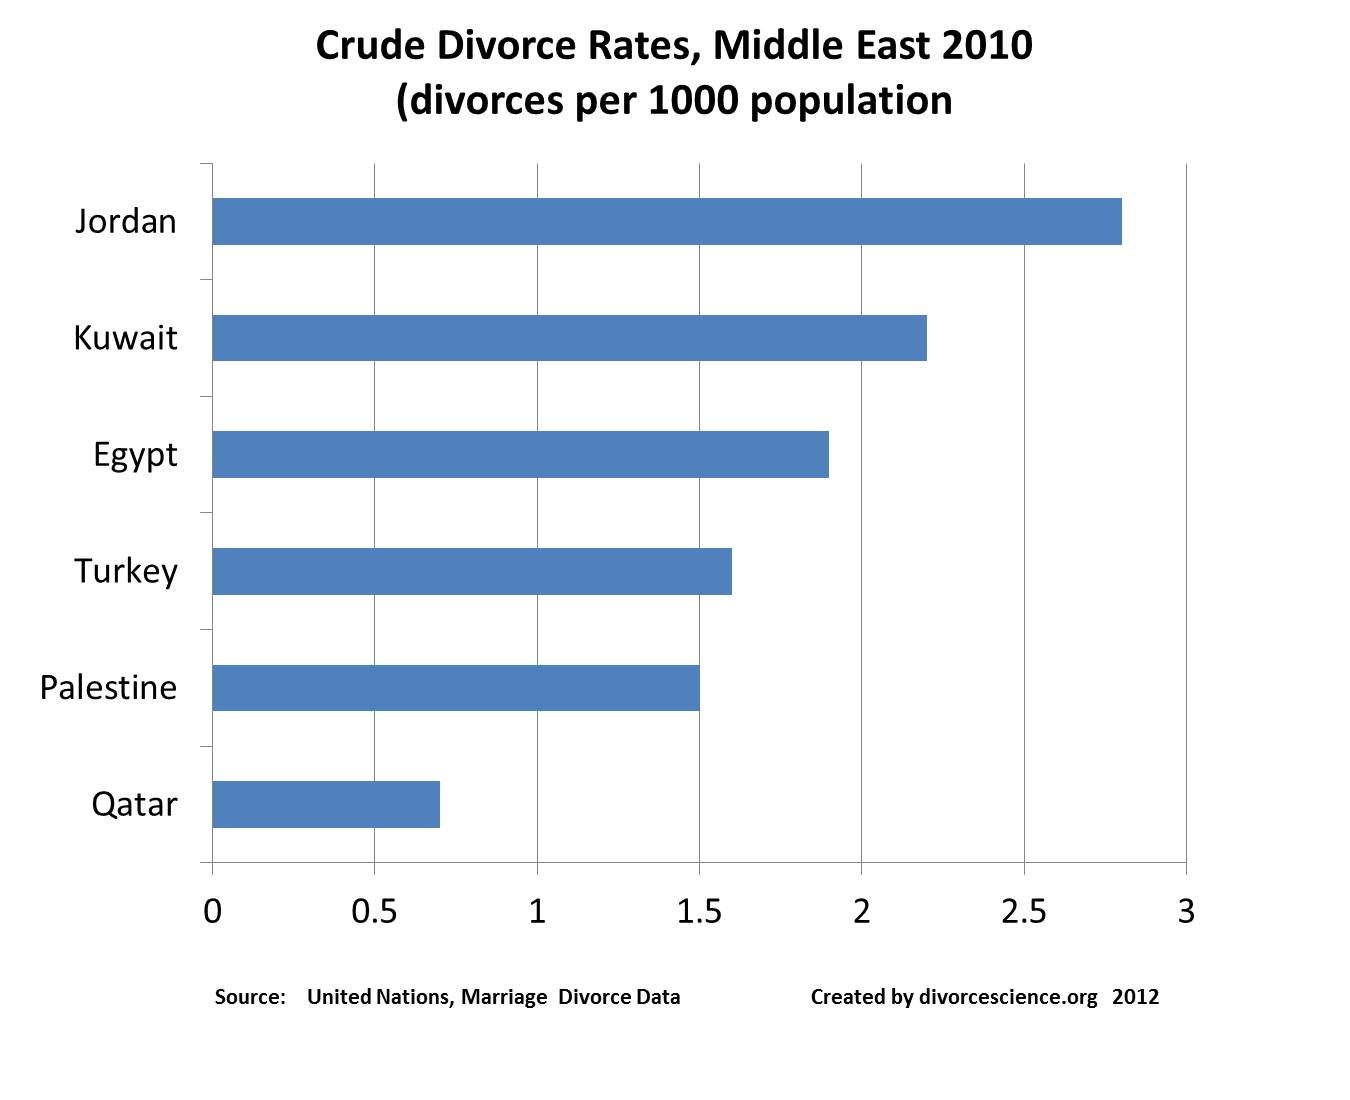 Divorce Rates in the Middle East